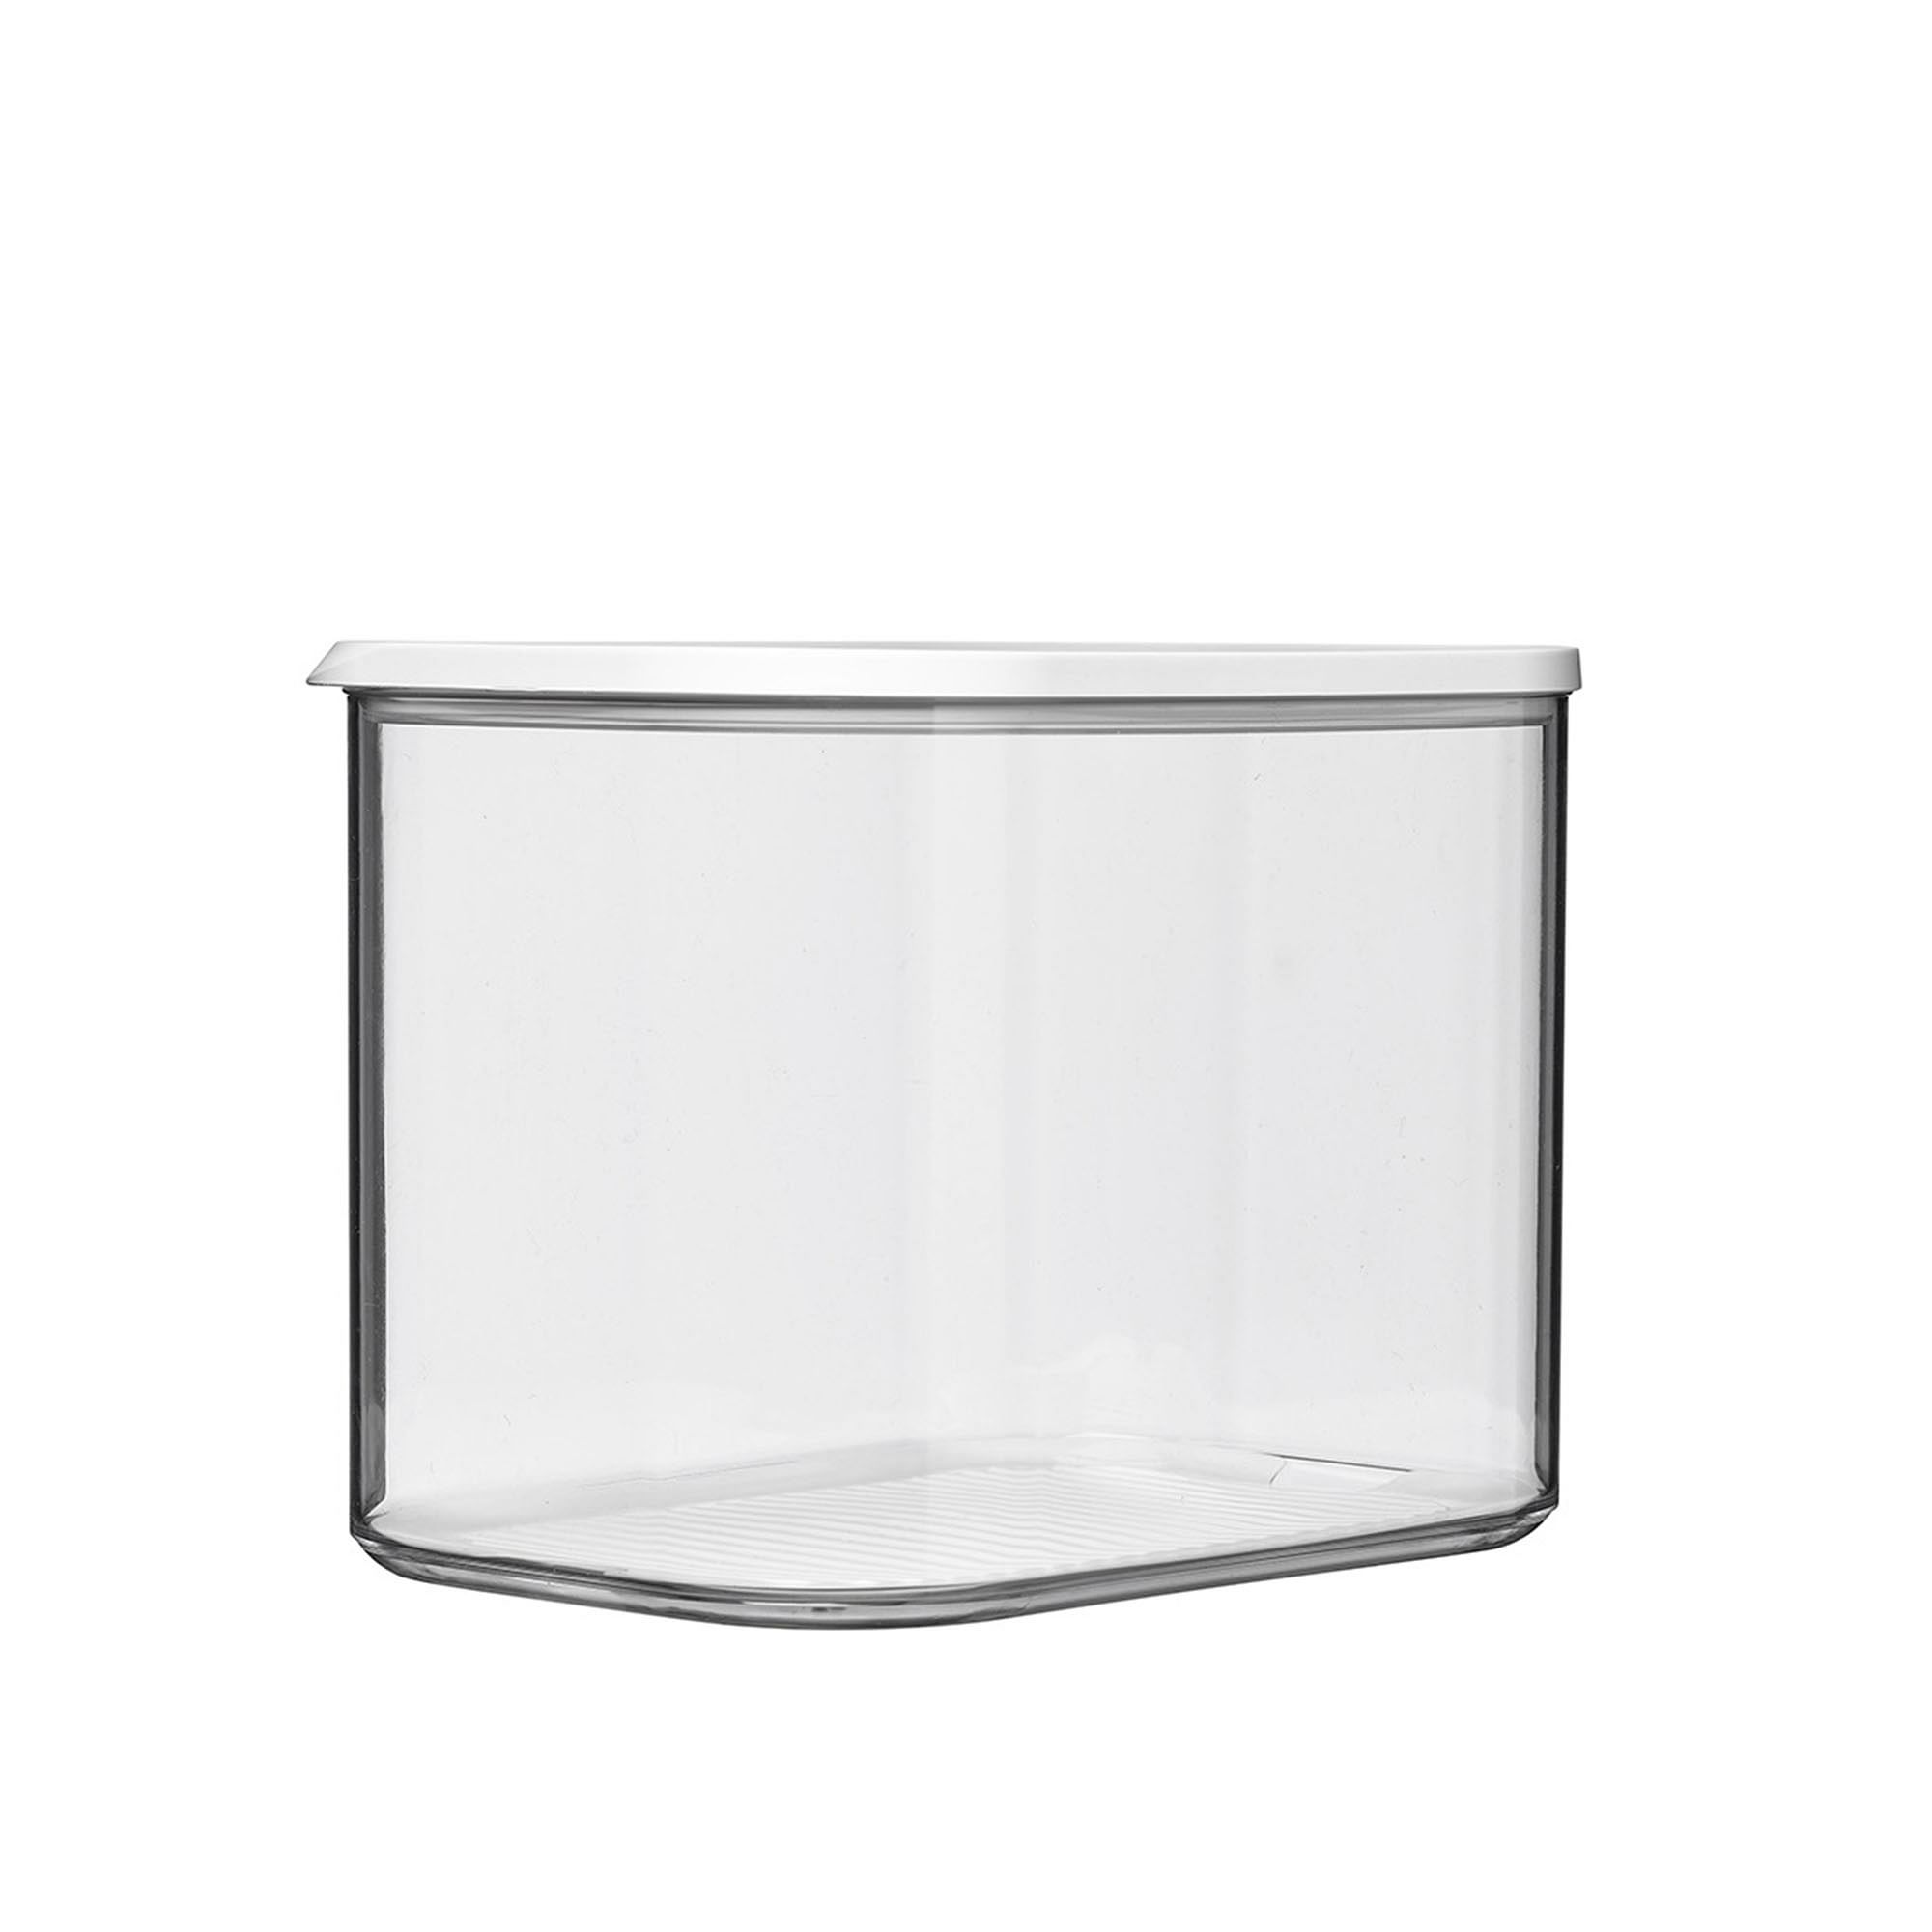 Mepal Modula Food Storage Container Box Set of 2 | West Elm